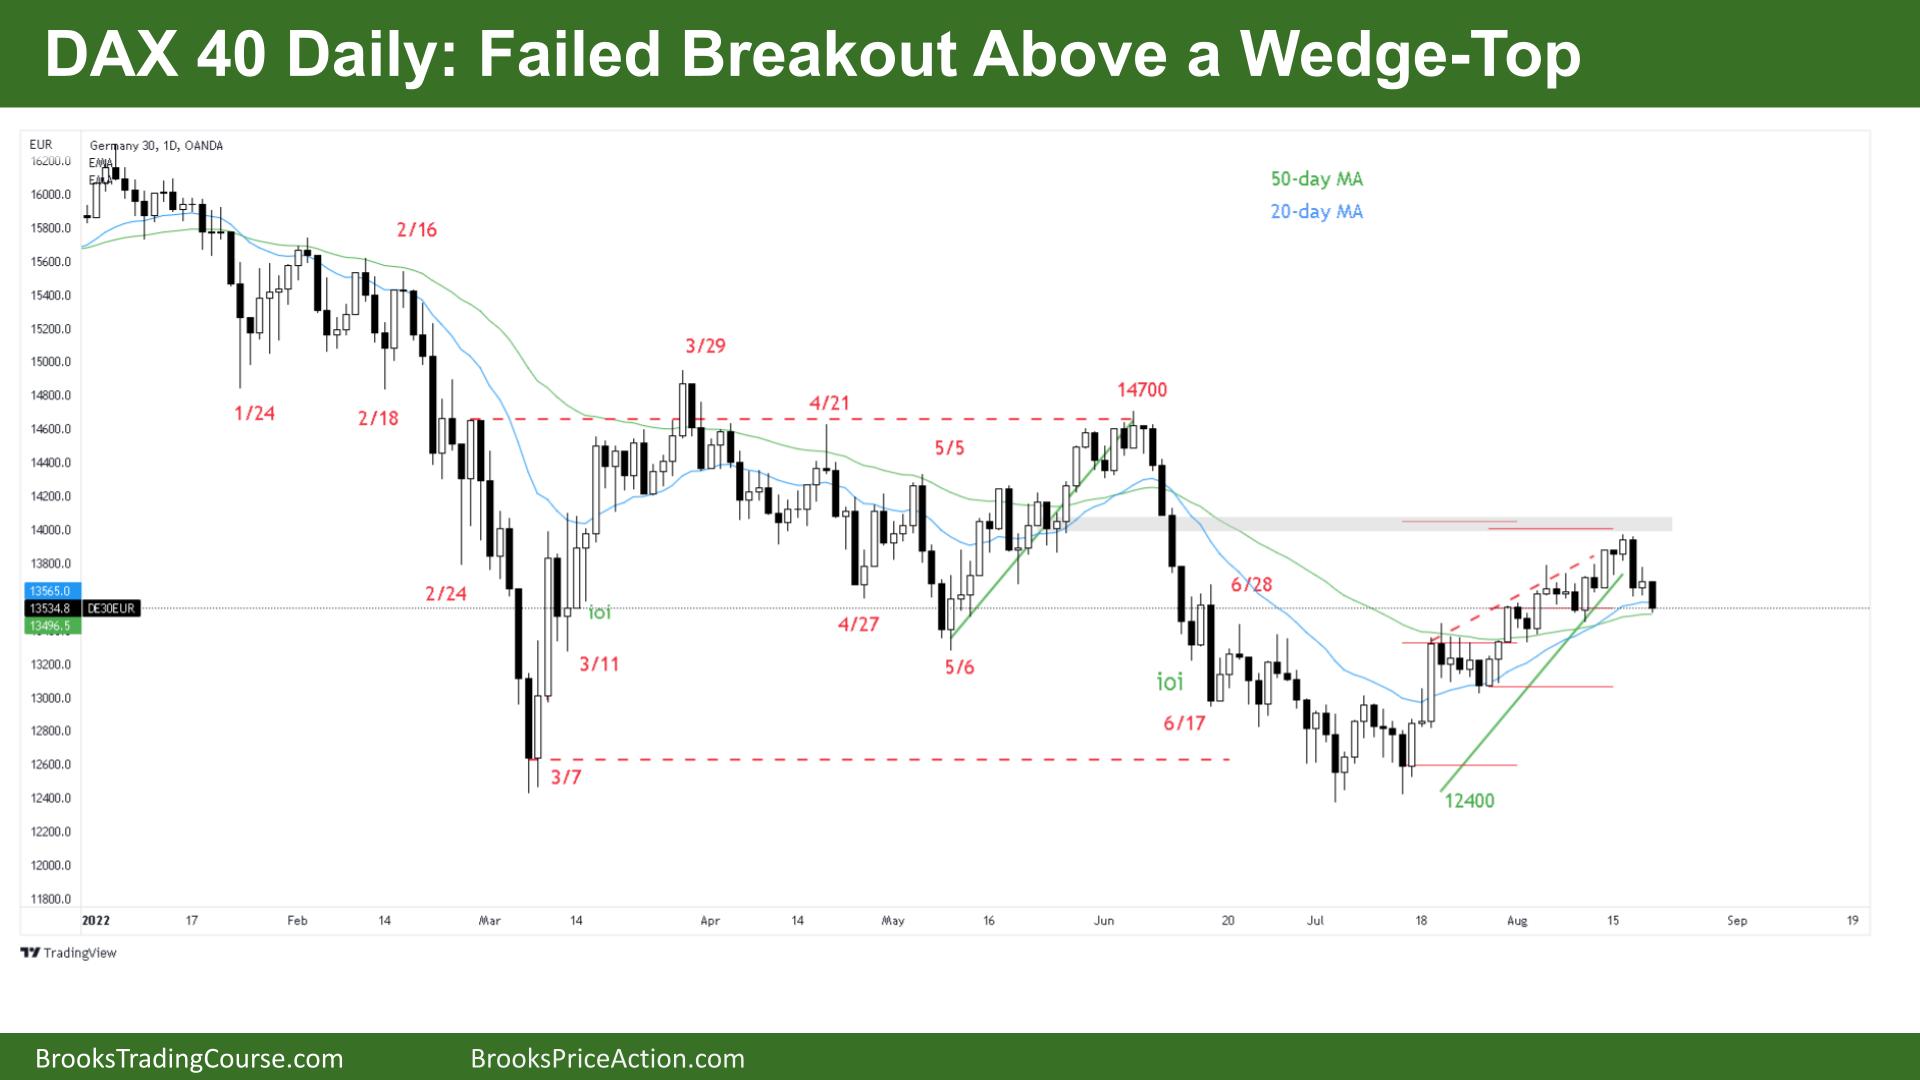 DAX 40 Failed Breakout Above a Wedge-Top